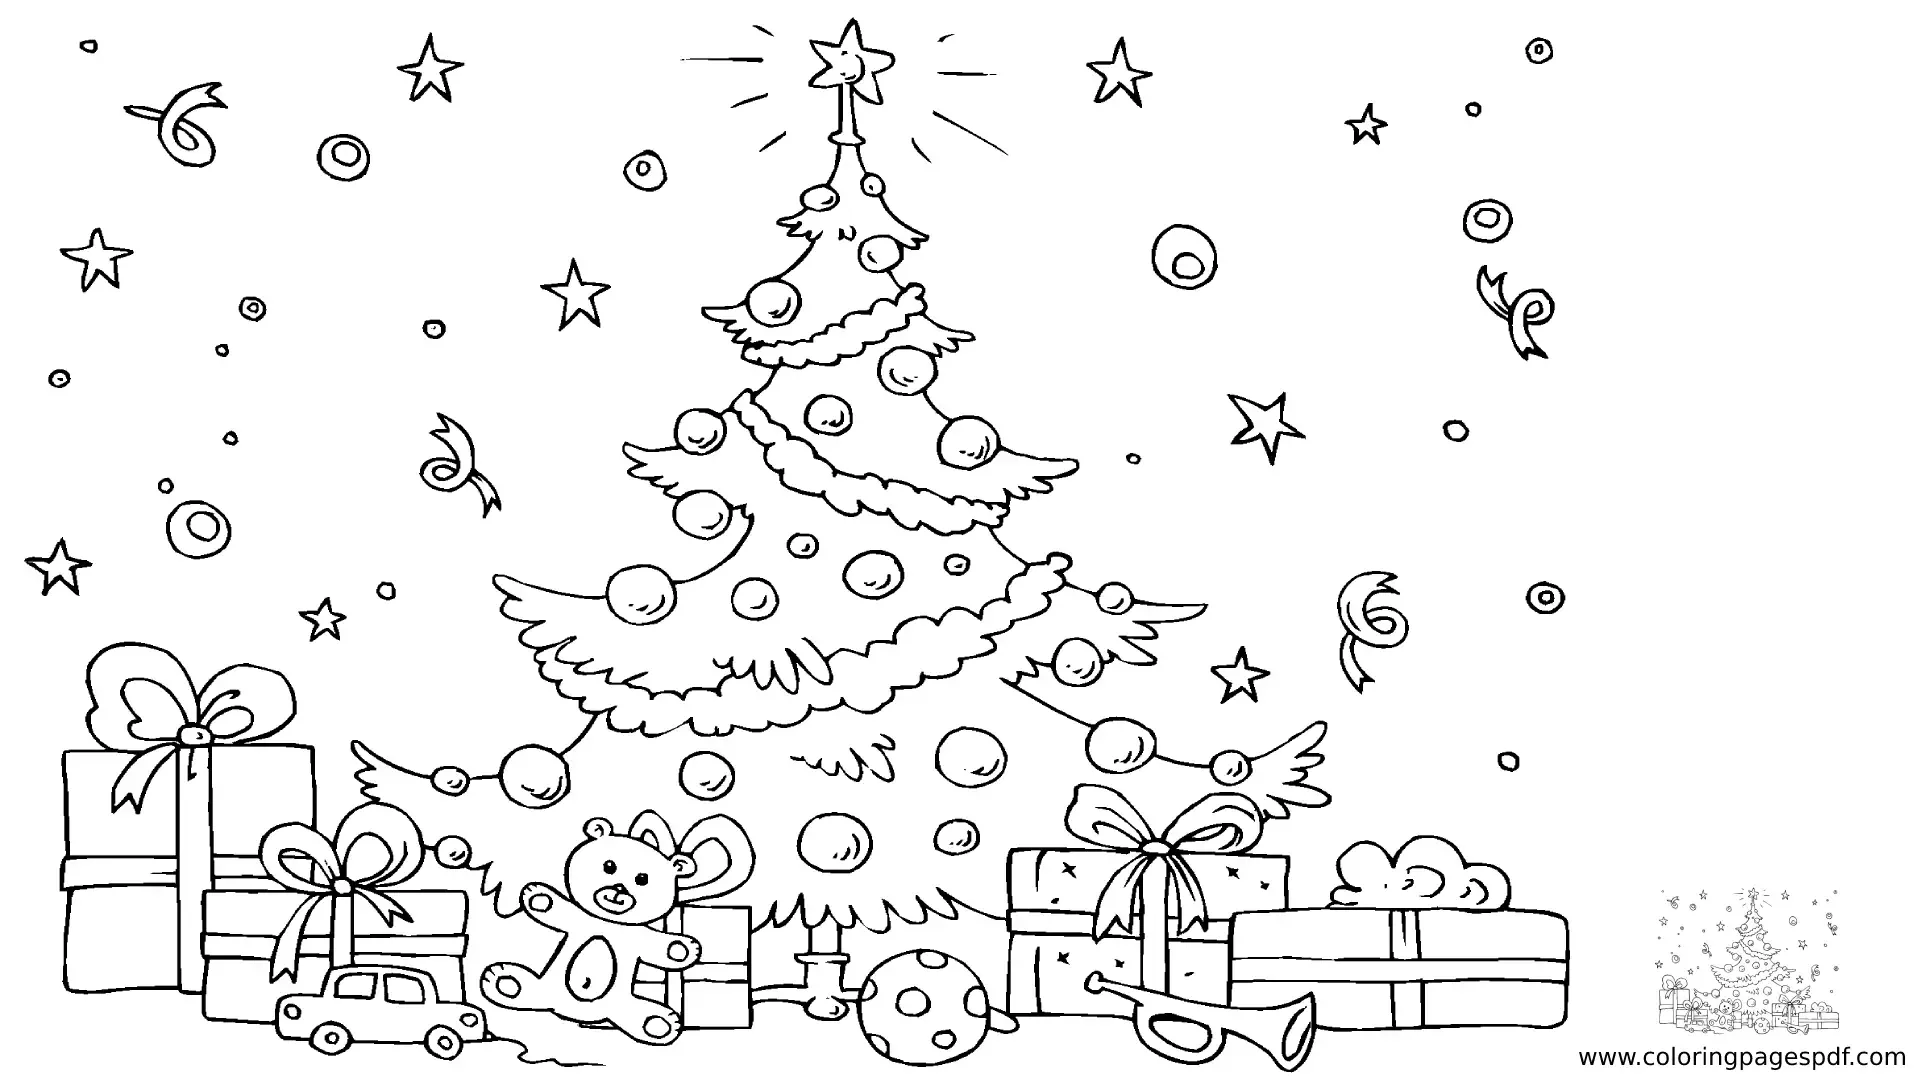 Coloring Page Of A Christmas Tree Surrounded By Presents